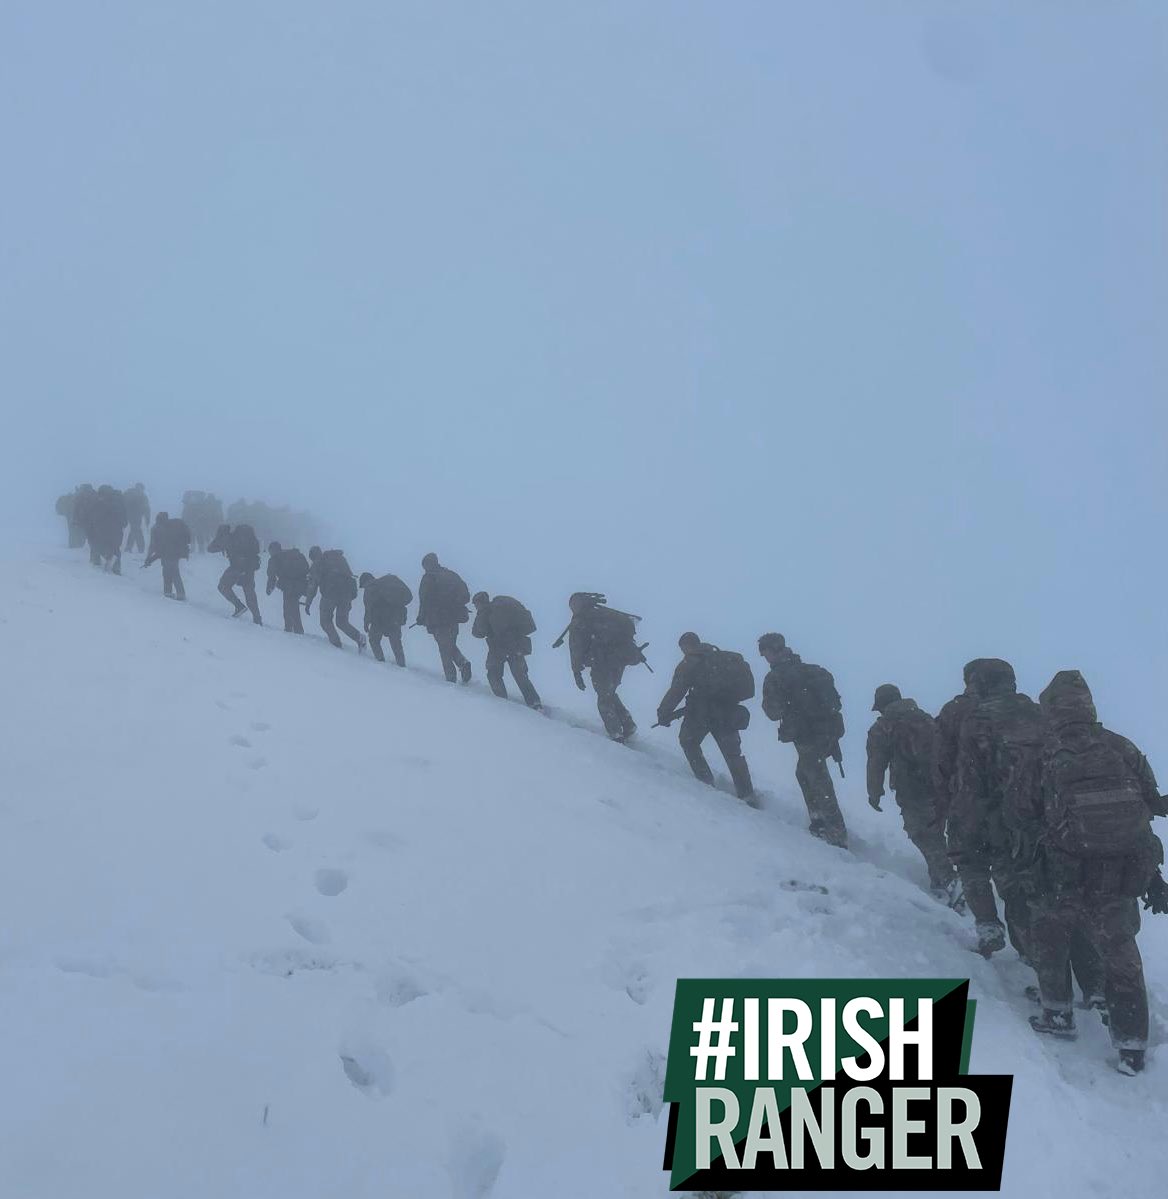 #IRISHRANGERS from D (ISR) Coy 1 R IRISH have successfully summited the Pen y Fan, enduring extreme weather conditions of -8 degrees and whiteout snow storms, as part of an 8-week selection cadre. ❄️☘️